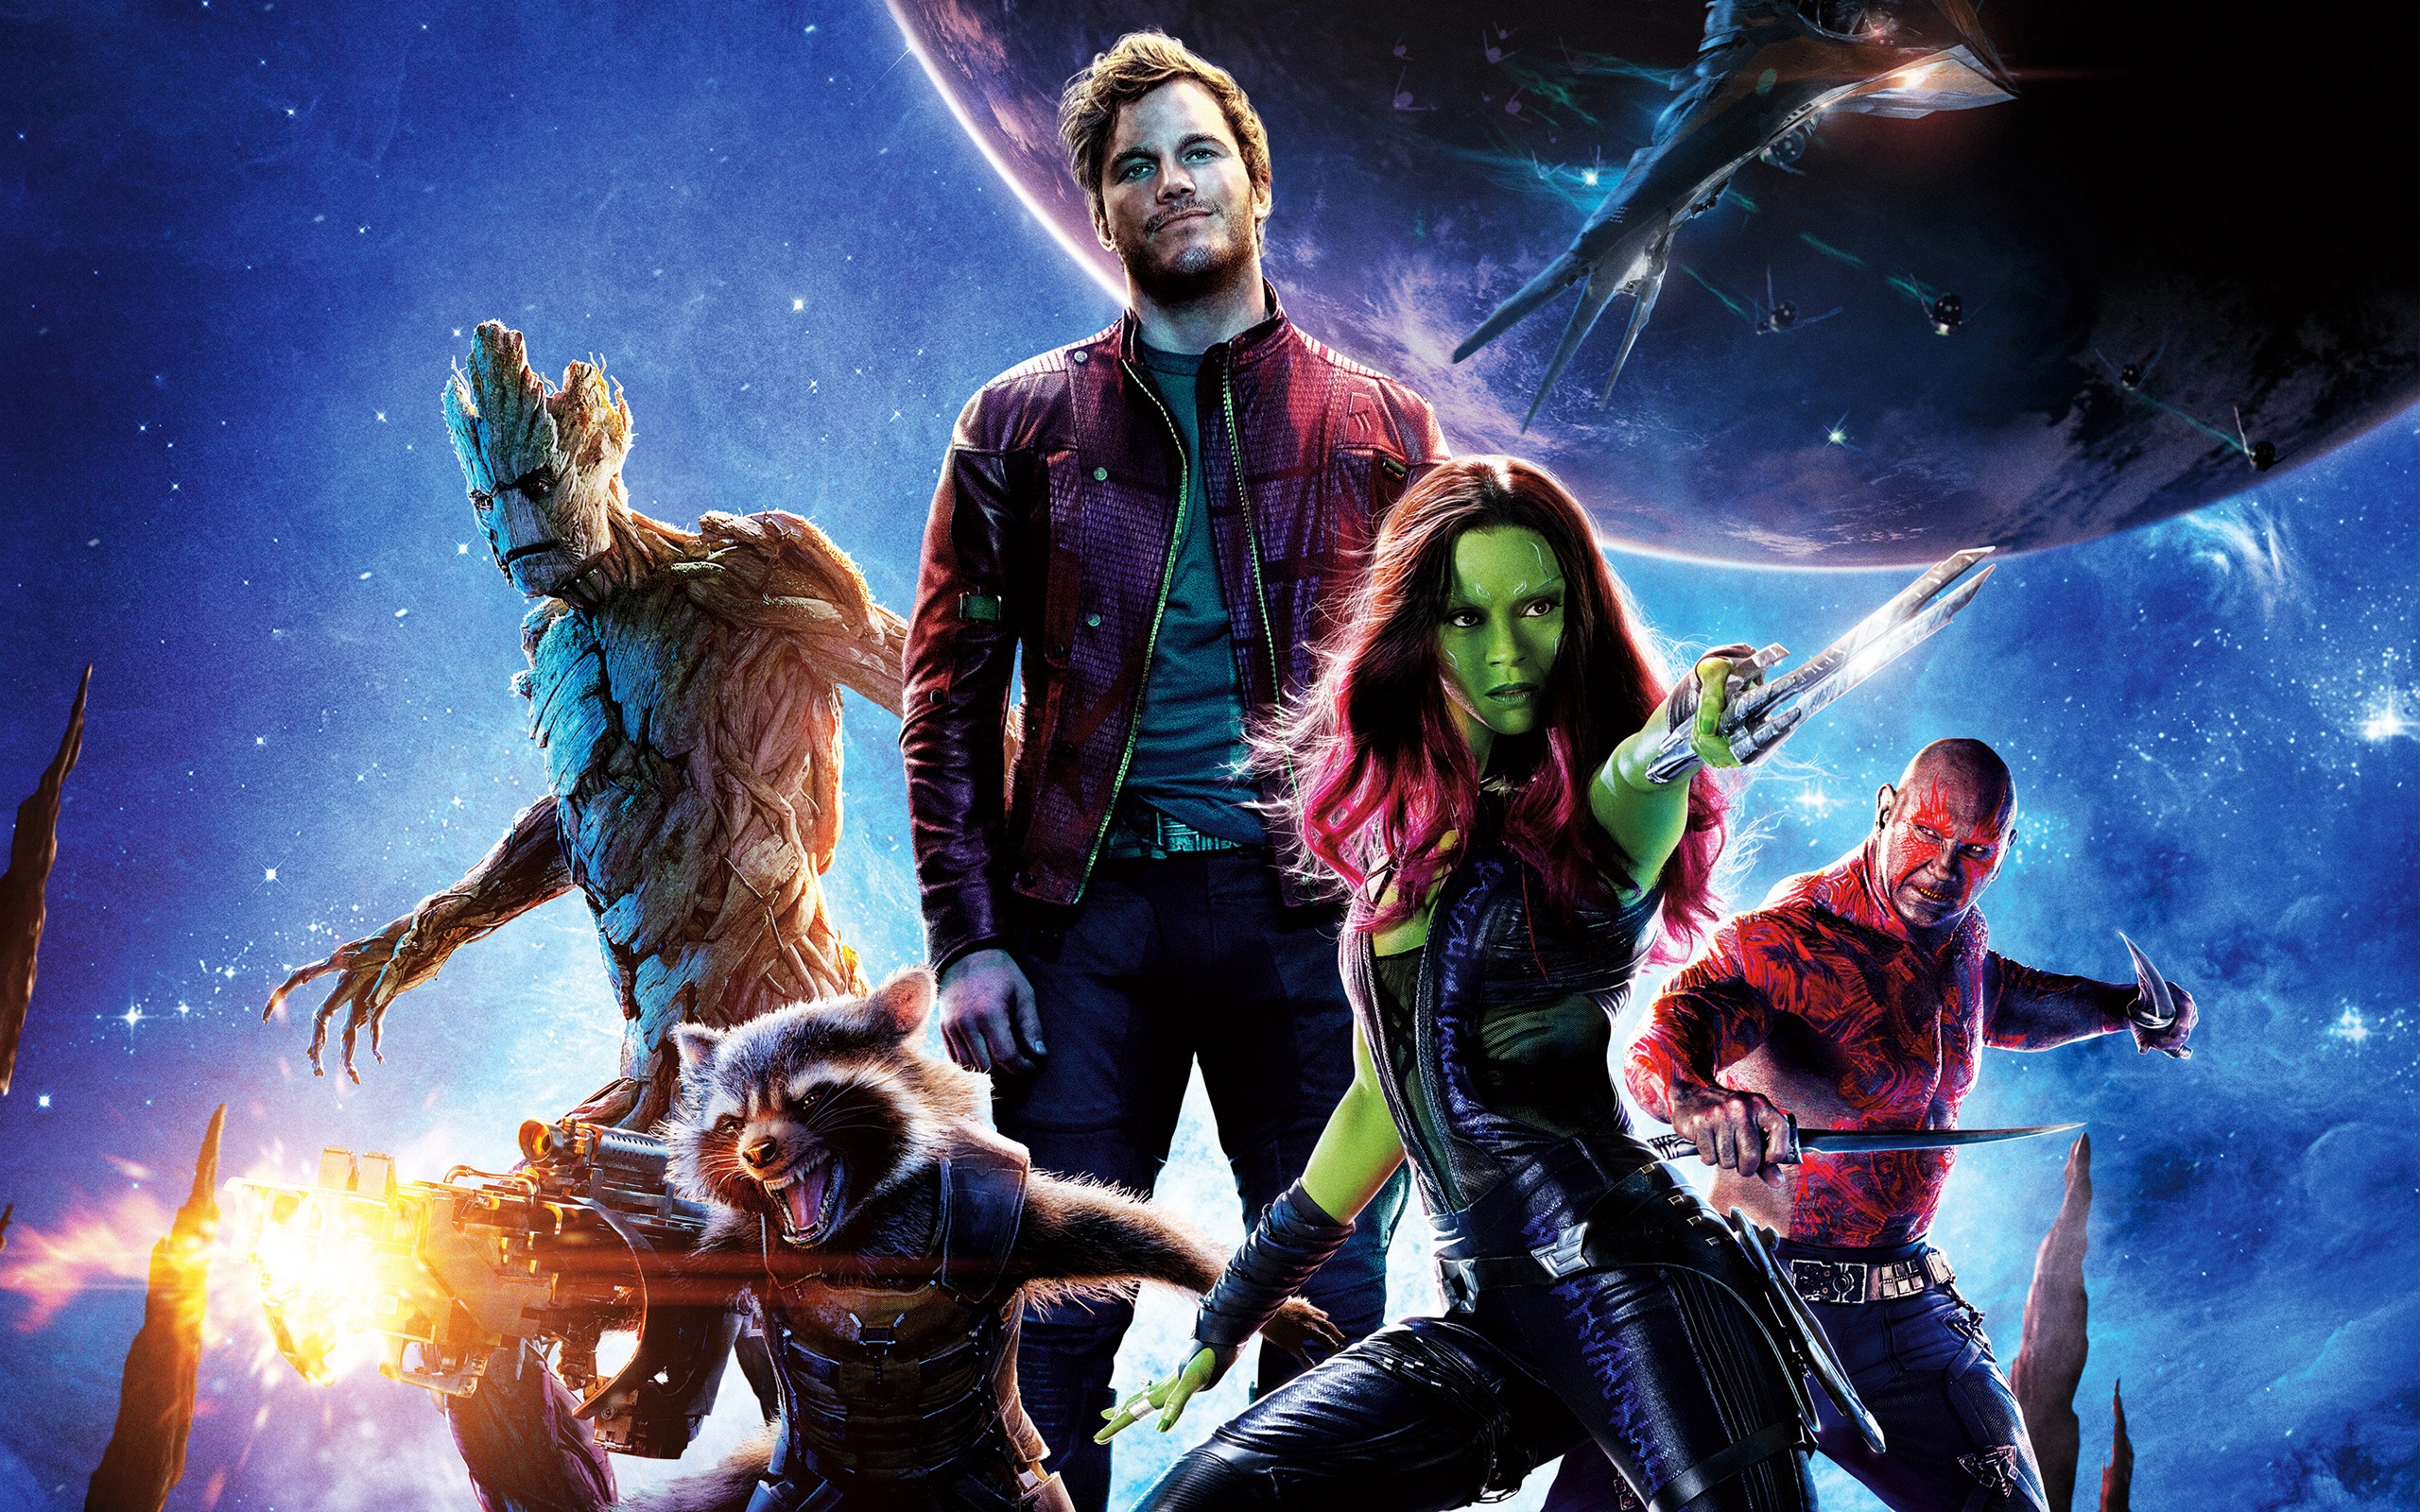 Guardians of the Galaxy 2014 HD movie wallpapers #1 - 2560x1600